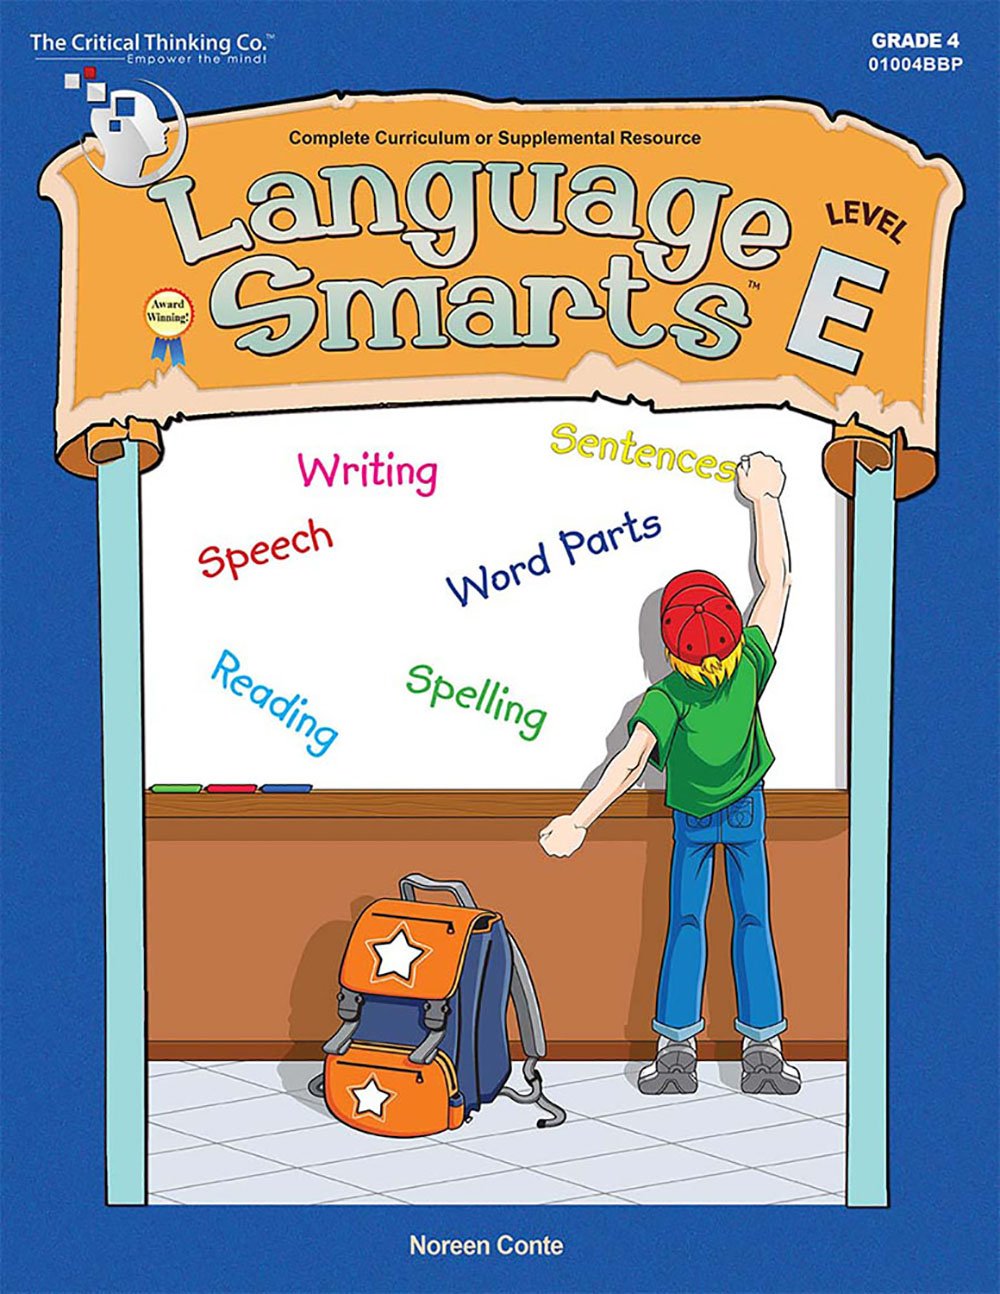 Language Smarts Level E Workbook - Reading, Writing, Grammar, and Punctuation for Grade 4